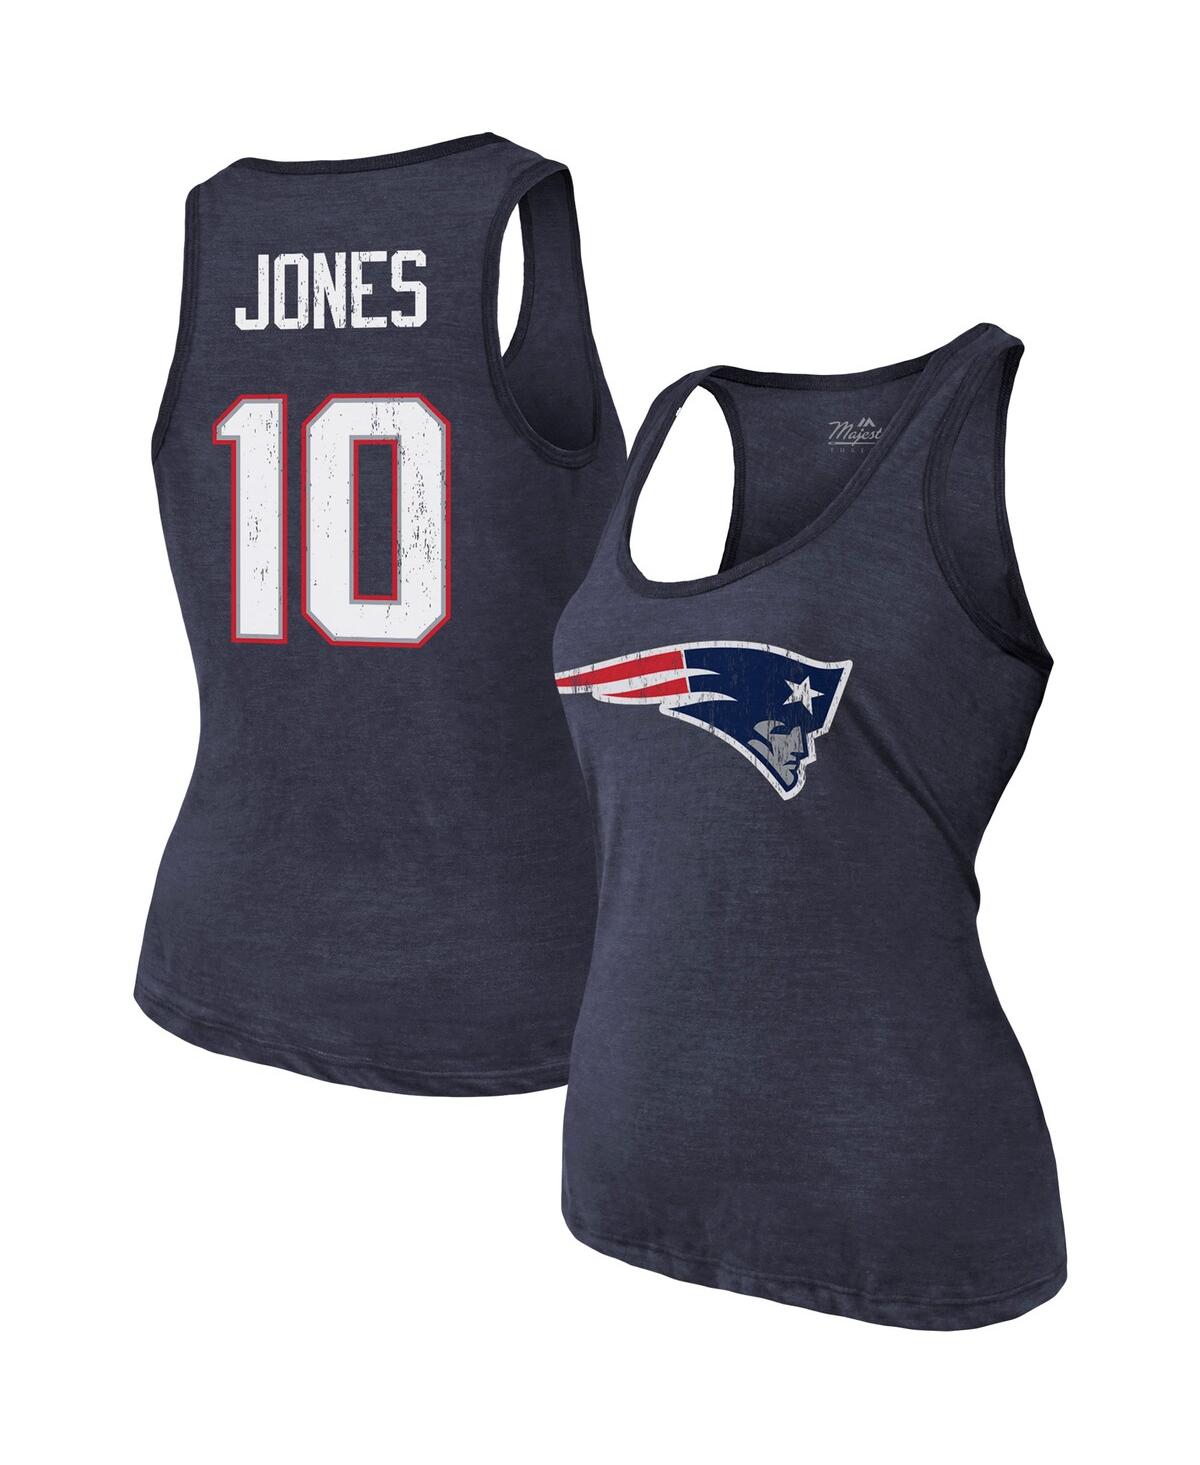 Women's Majestic Threads Mac Jones Navy New England Patriots Player Name and Number Tri-Blend Tank Top - Navy